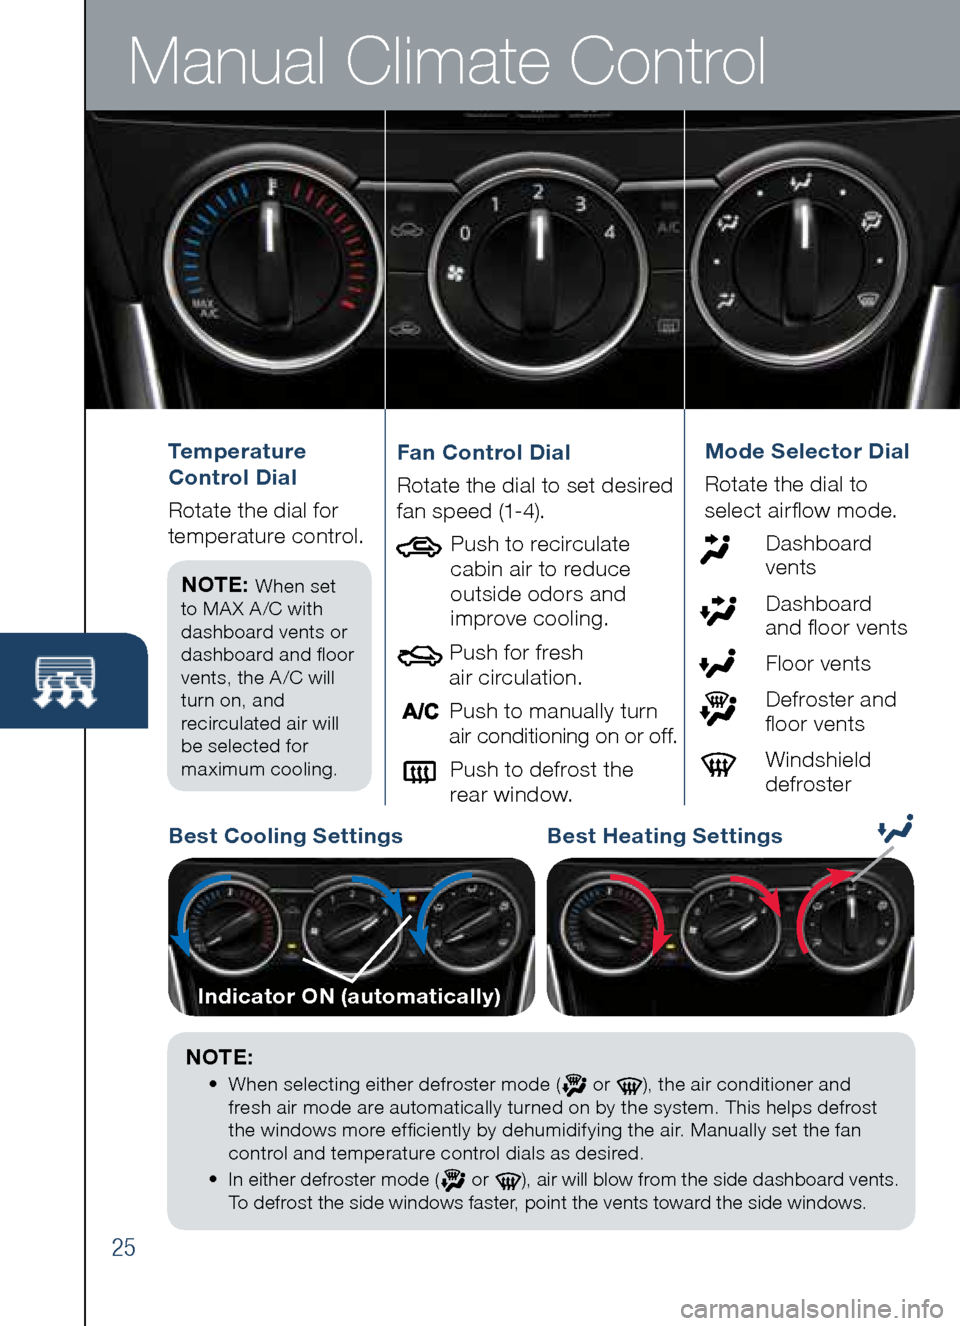 MAZDA MODEL CX-5 2014  Smart Start Guide (in English) Manual Climate Control
25
Temperature  
Control Dial 
	R otat e	the	dial	for 	
temperature 	control.
NOTE: 	
When	set 		
to	MA X	A /C	with 		
dashboard	vents	or 	
dashboard	and	floor 		
vents,	the	A /